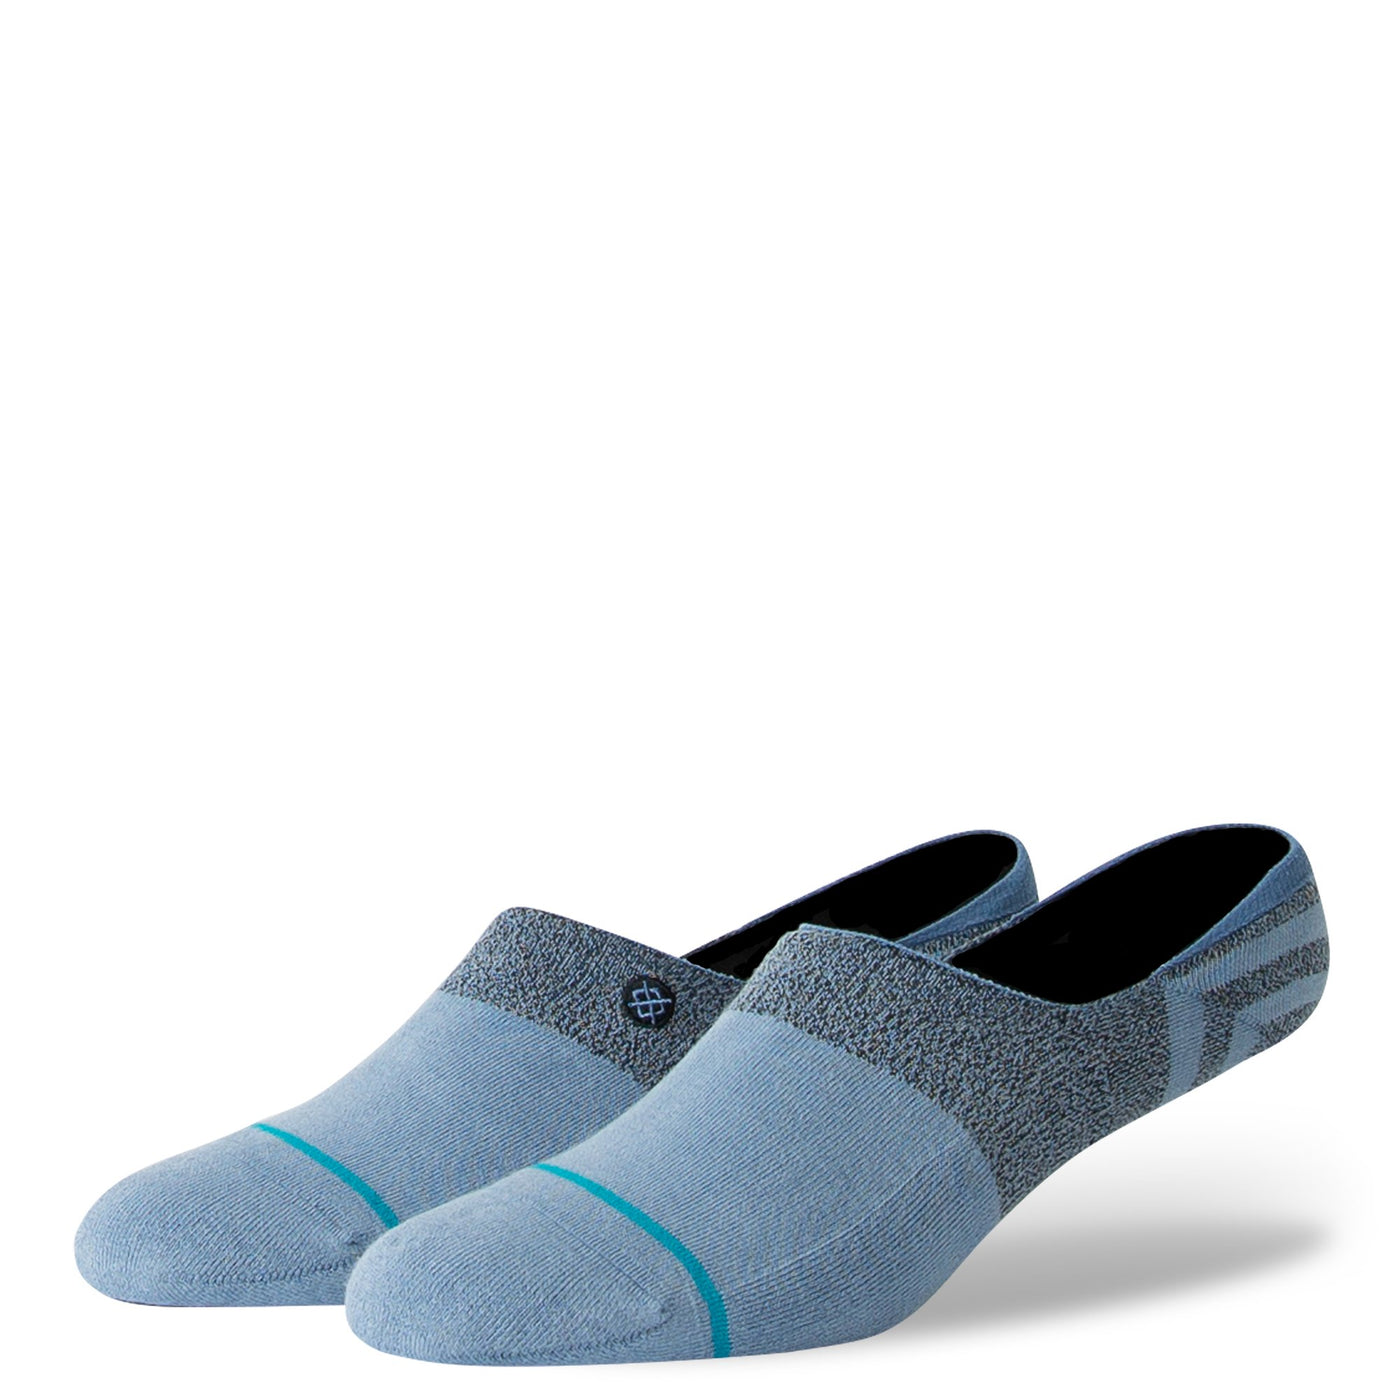 Stance "Gamut 2" Combed Cotton Socks